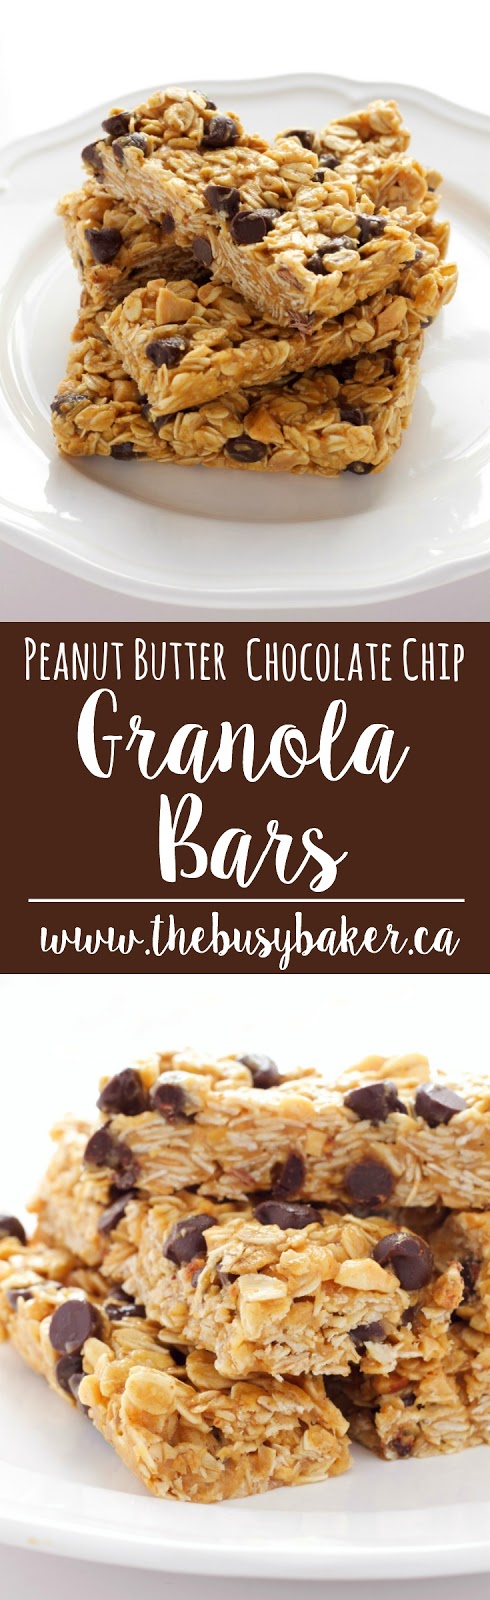 Peanut Butter Chocolate Chip Granola Bars Recipe | The Busy Baker